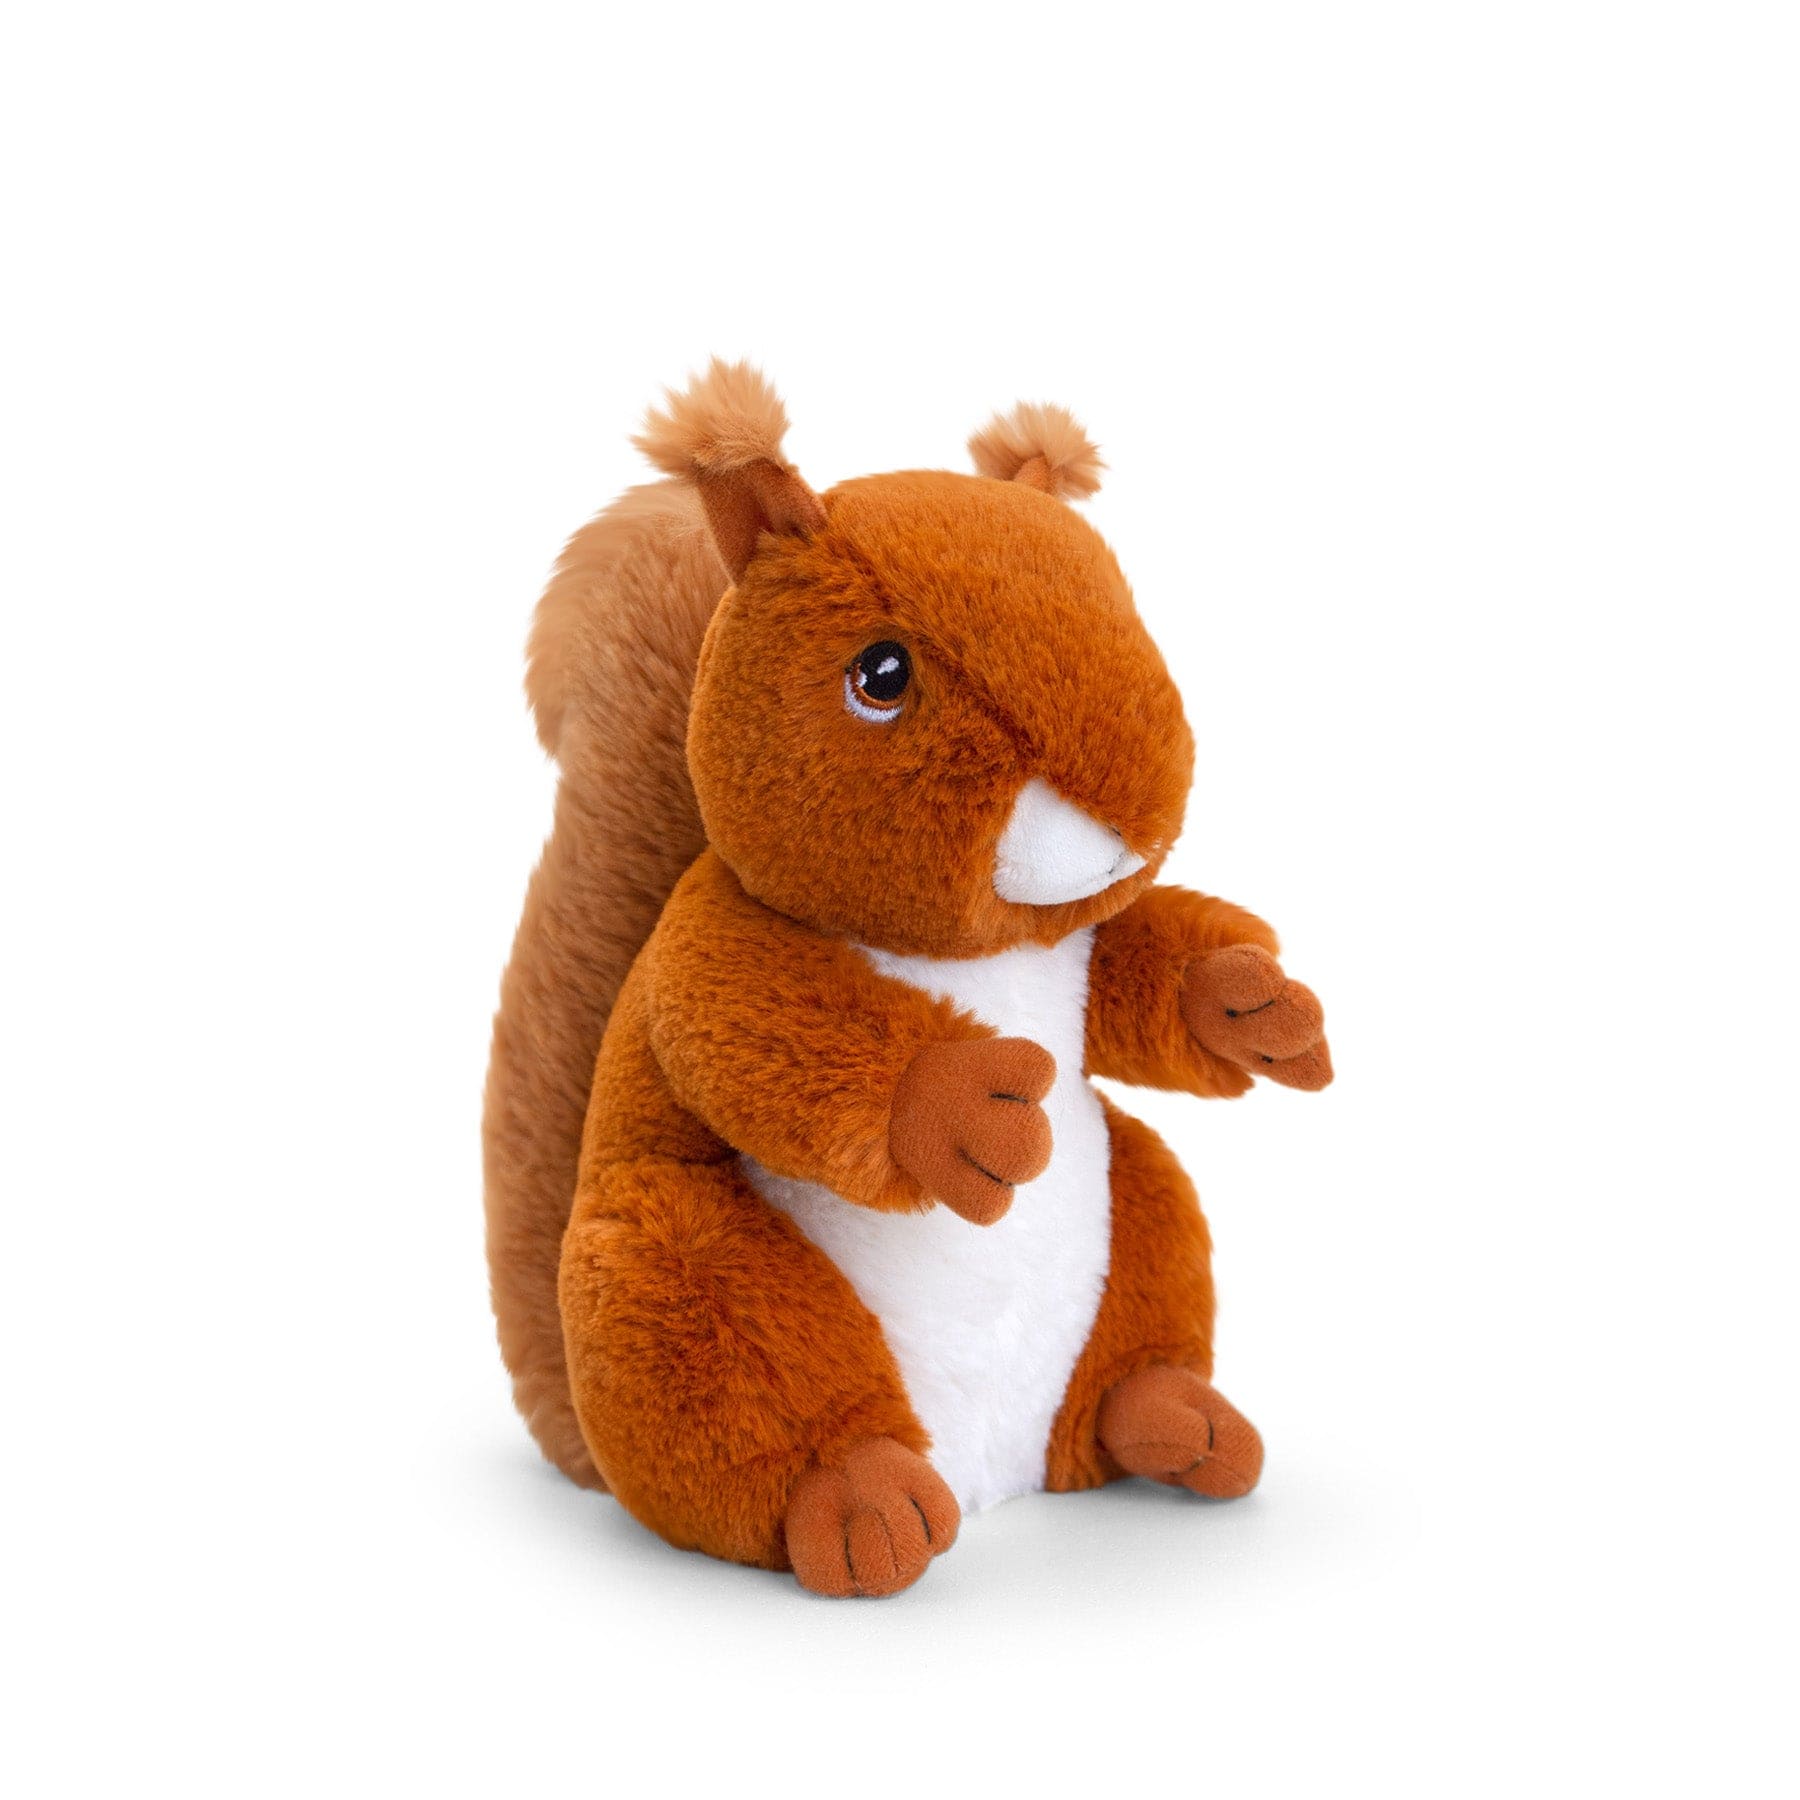 Keeleco red squirrel 19cm